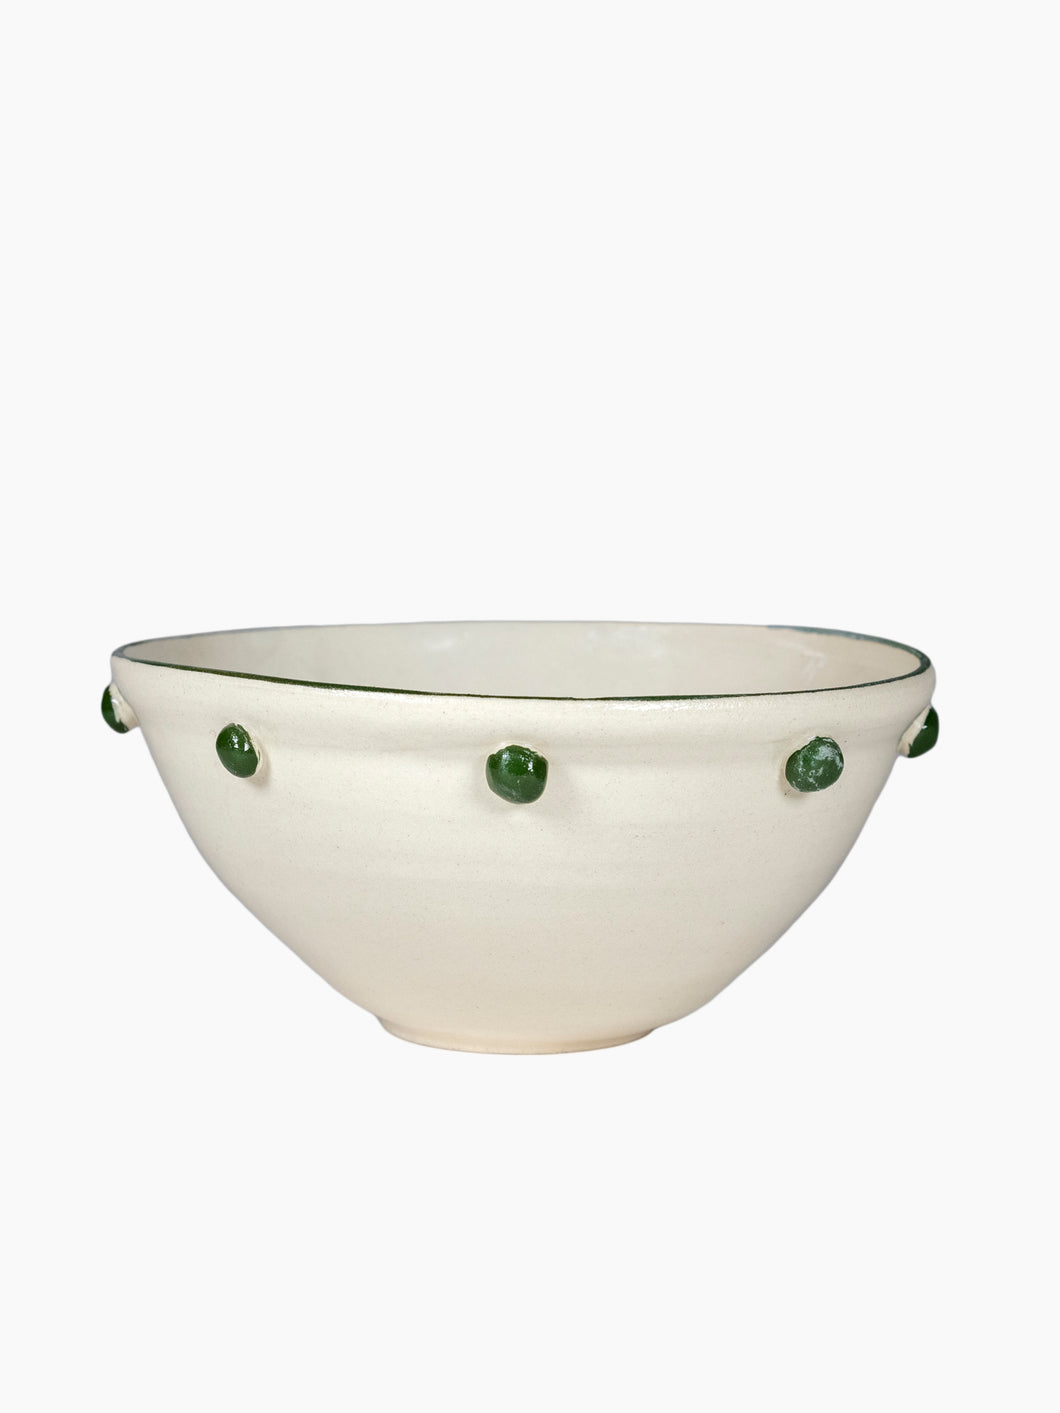 Nugget Bowl in Green